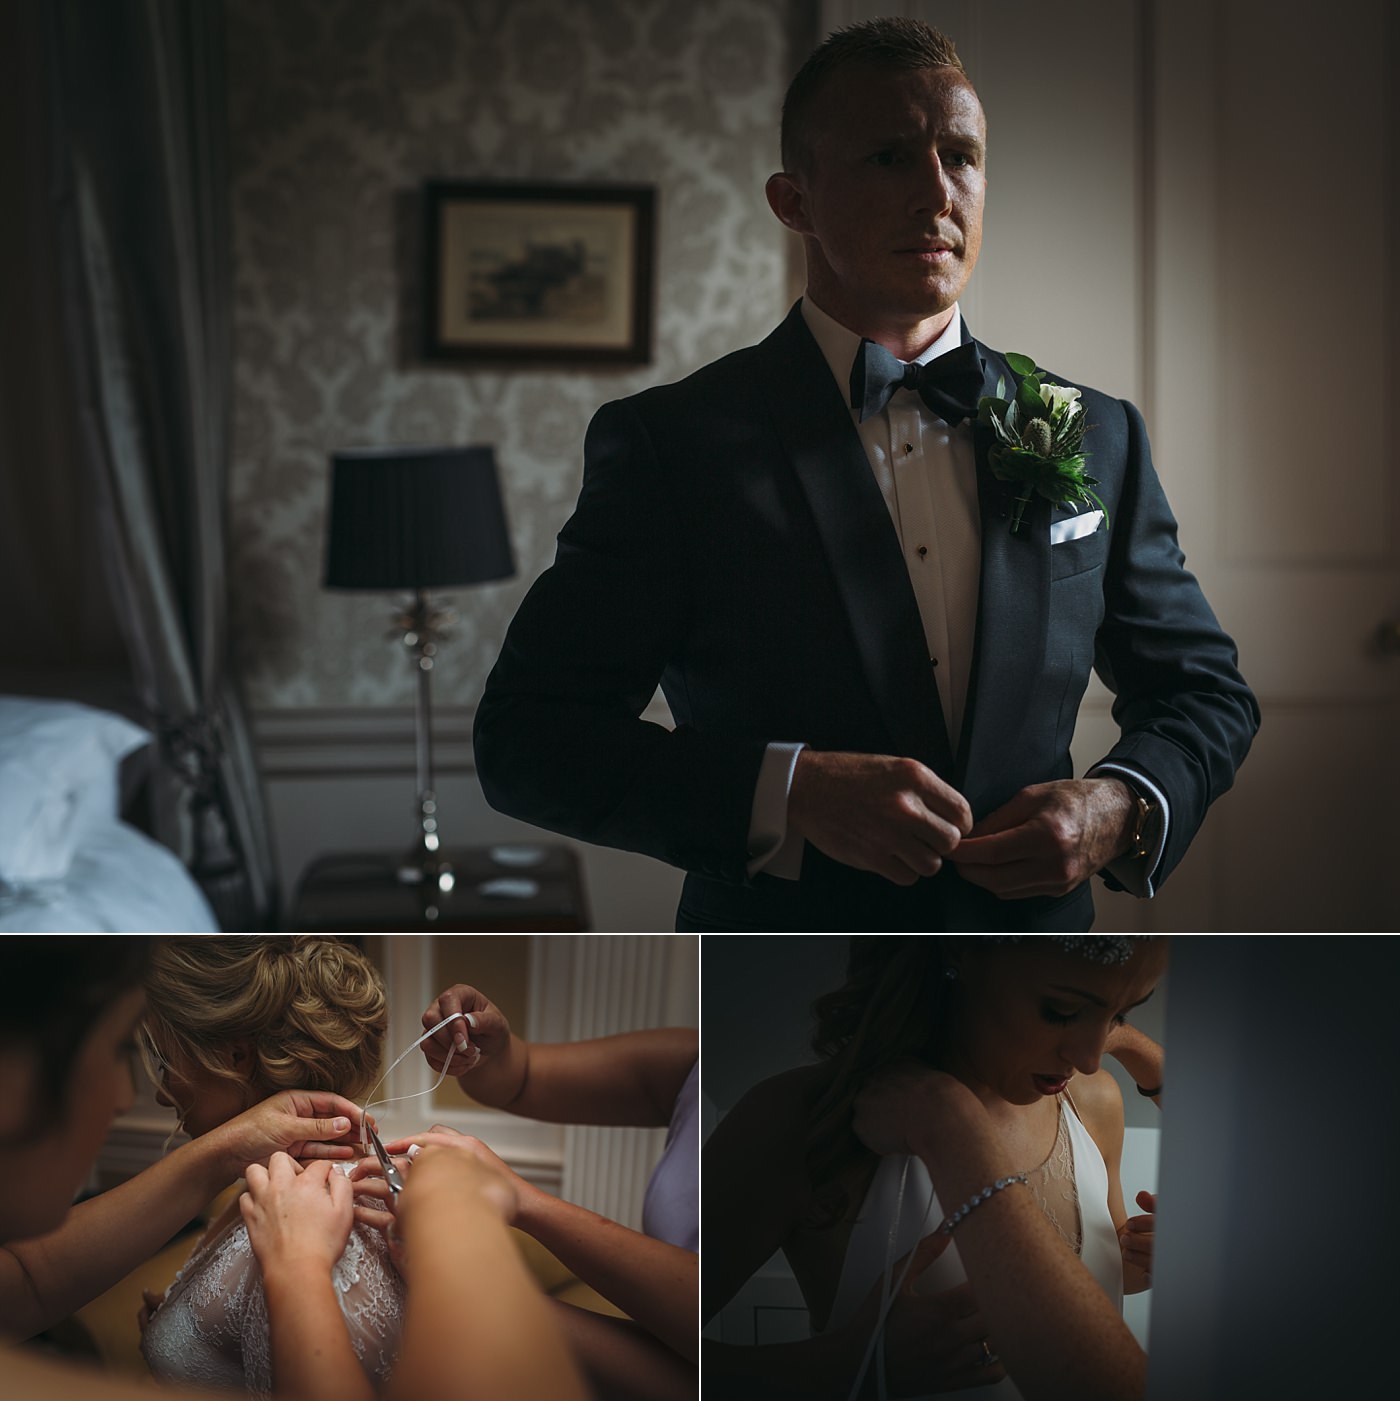 3 photographs showing final touches that take place before a wedding ceremony